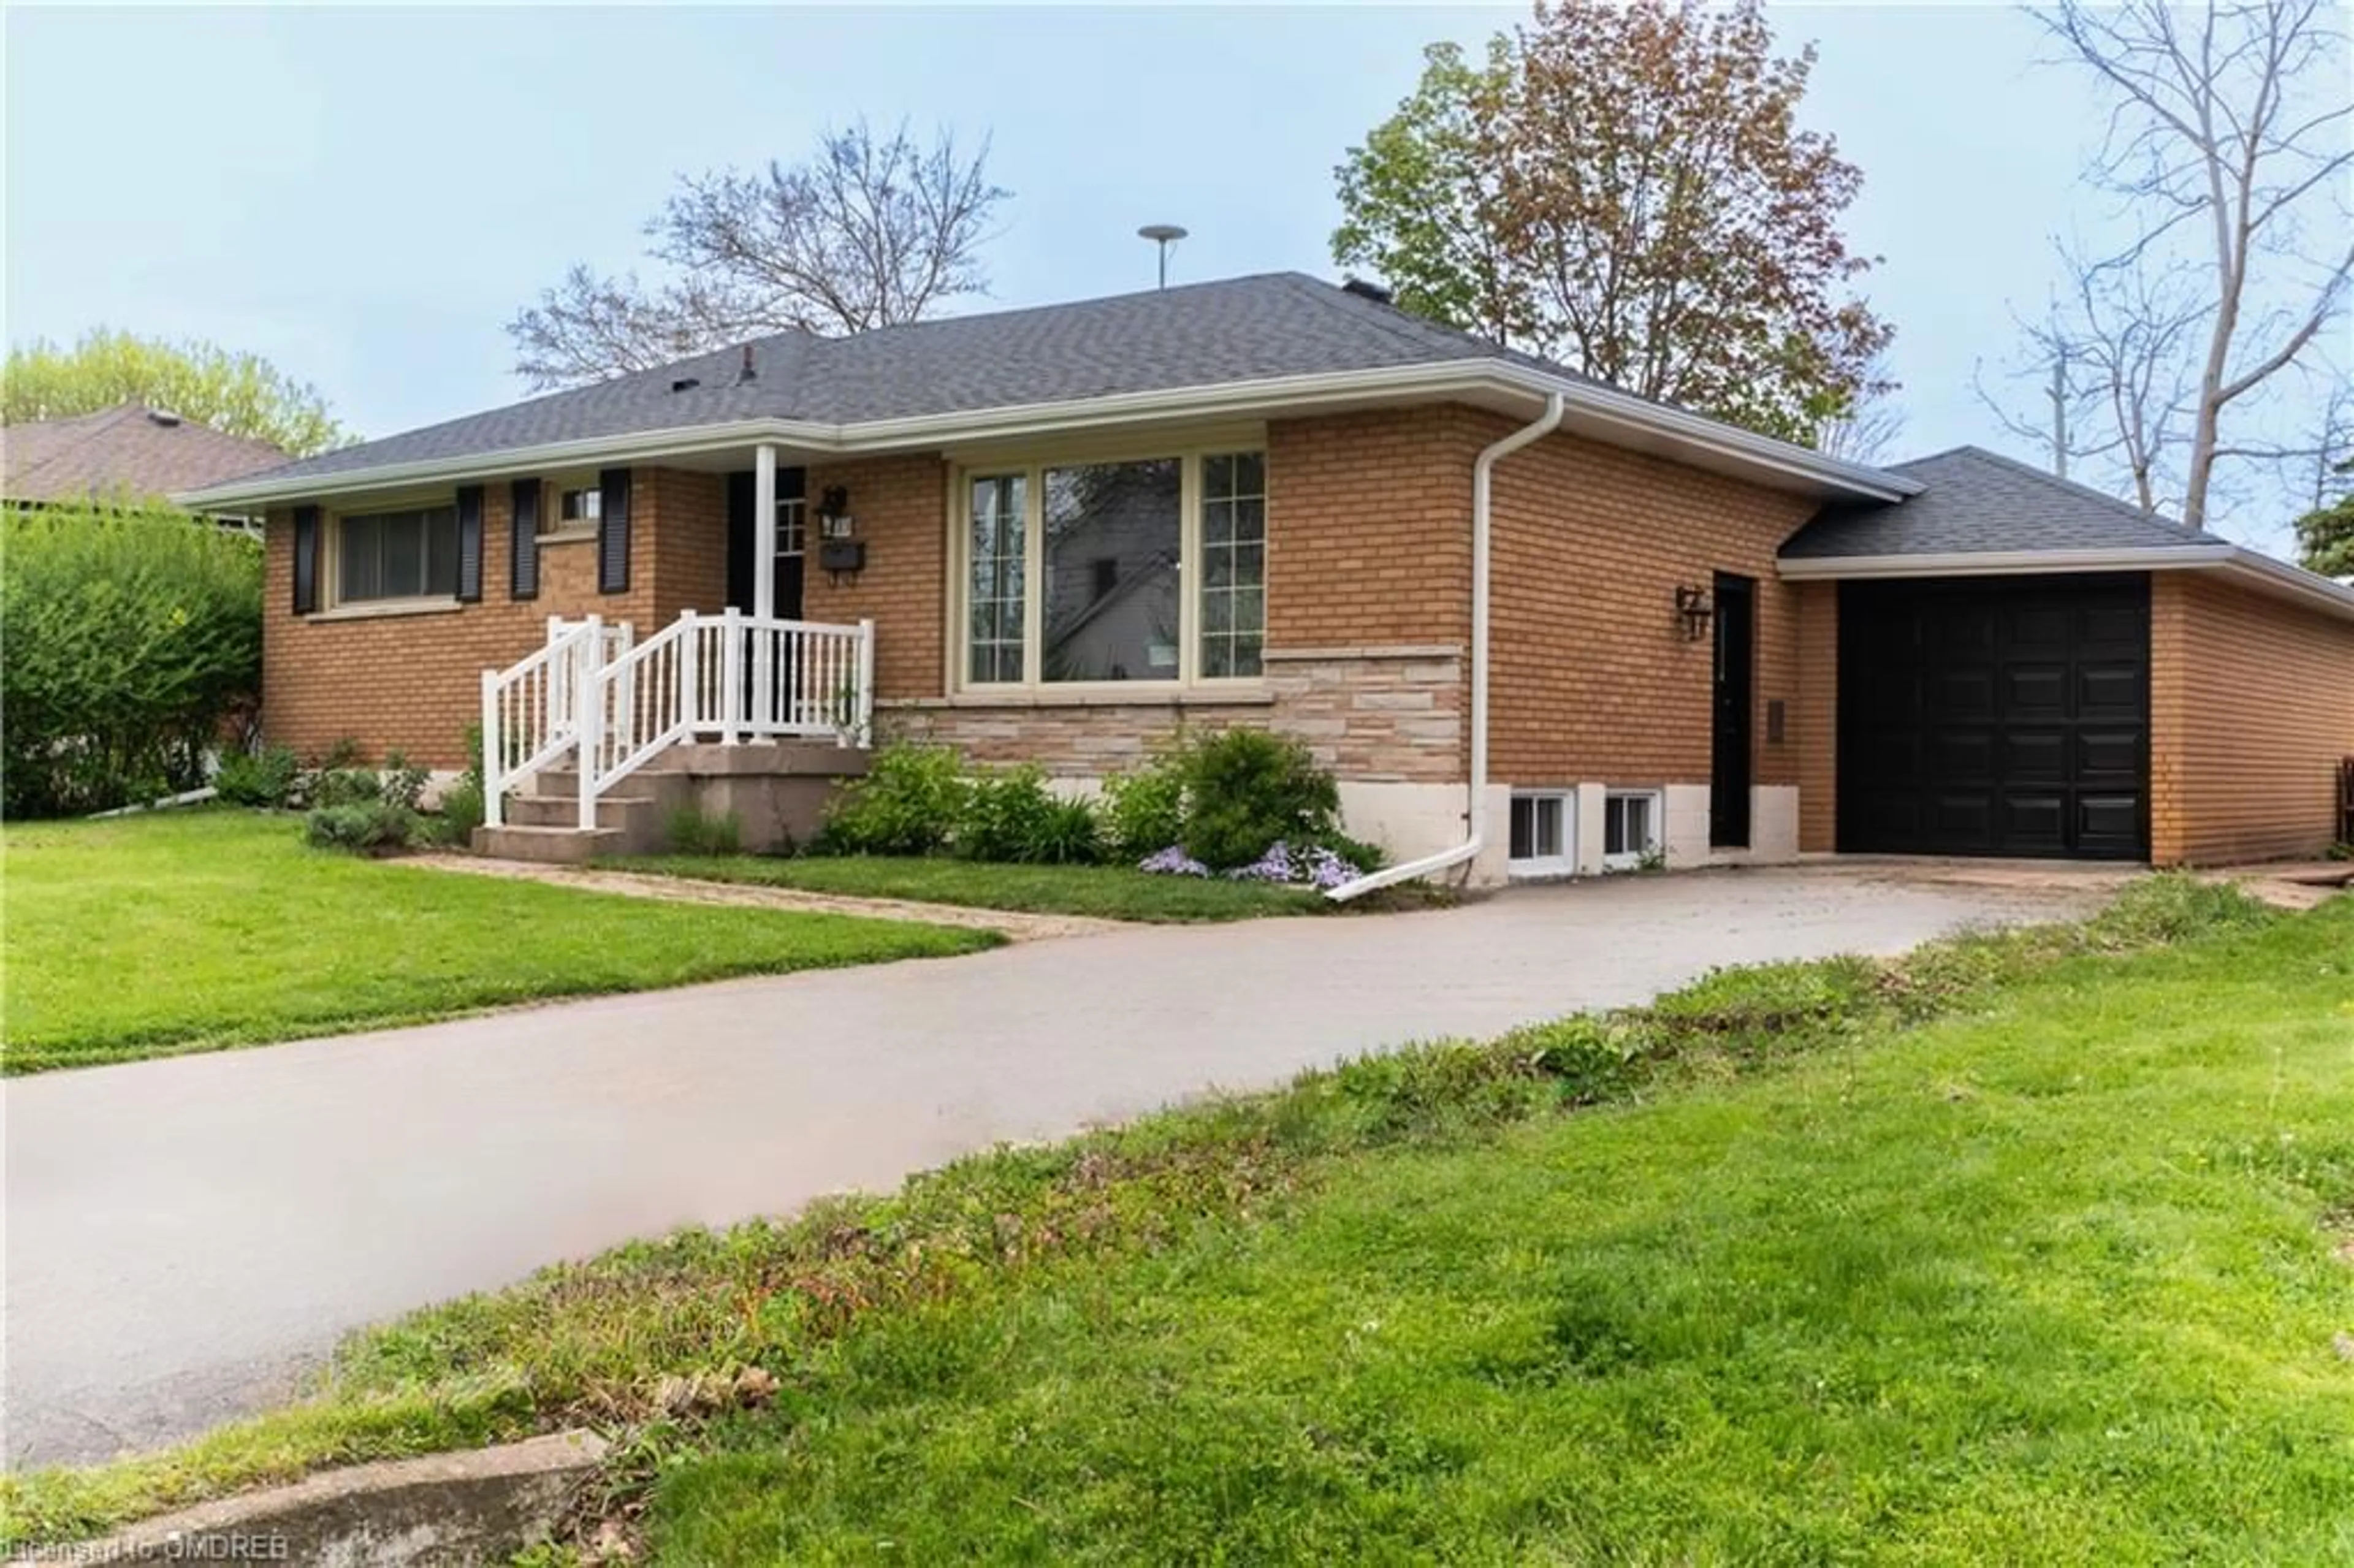 Home with brick exterior material for 433 Murray St, Grimsby Ontario L3M 3P8